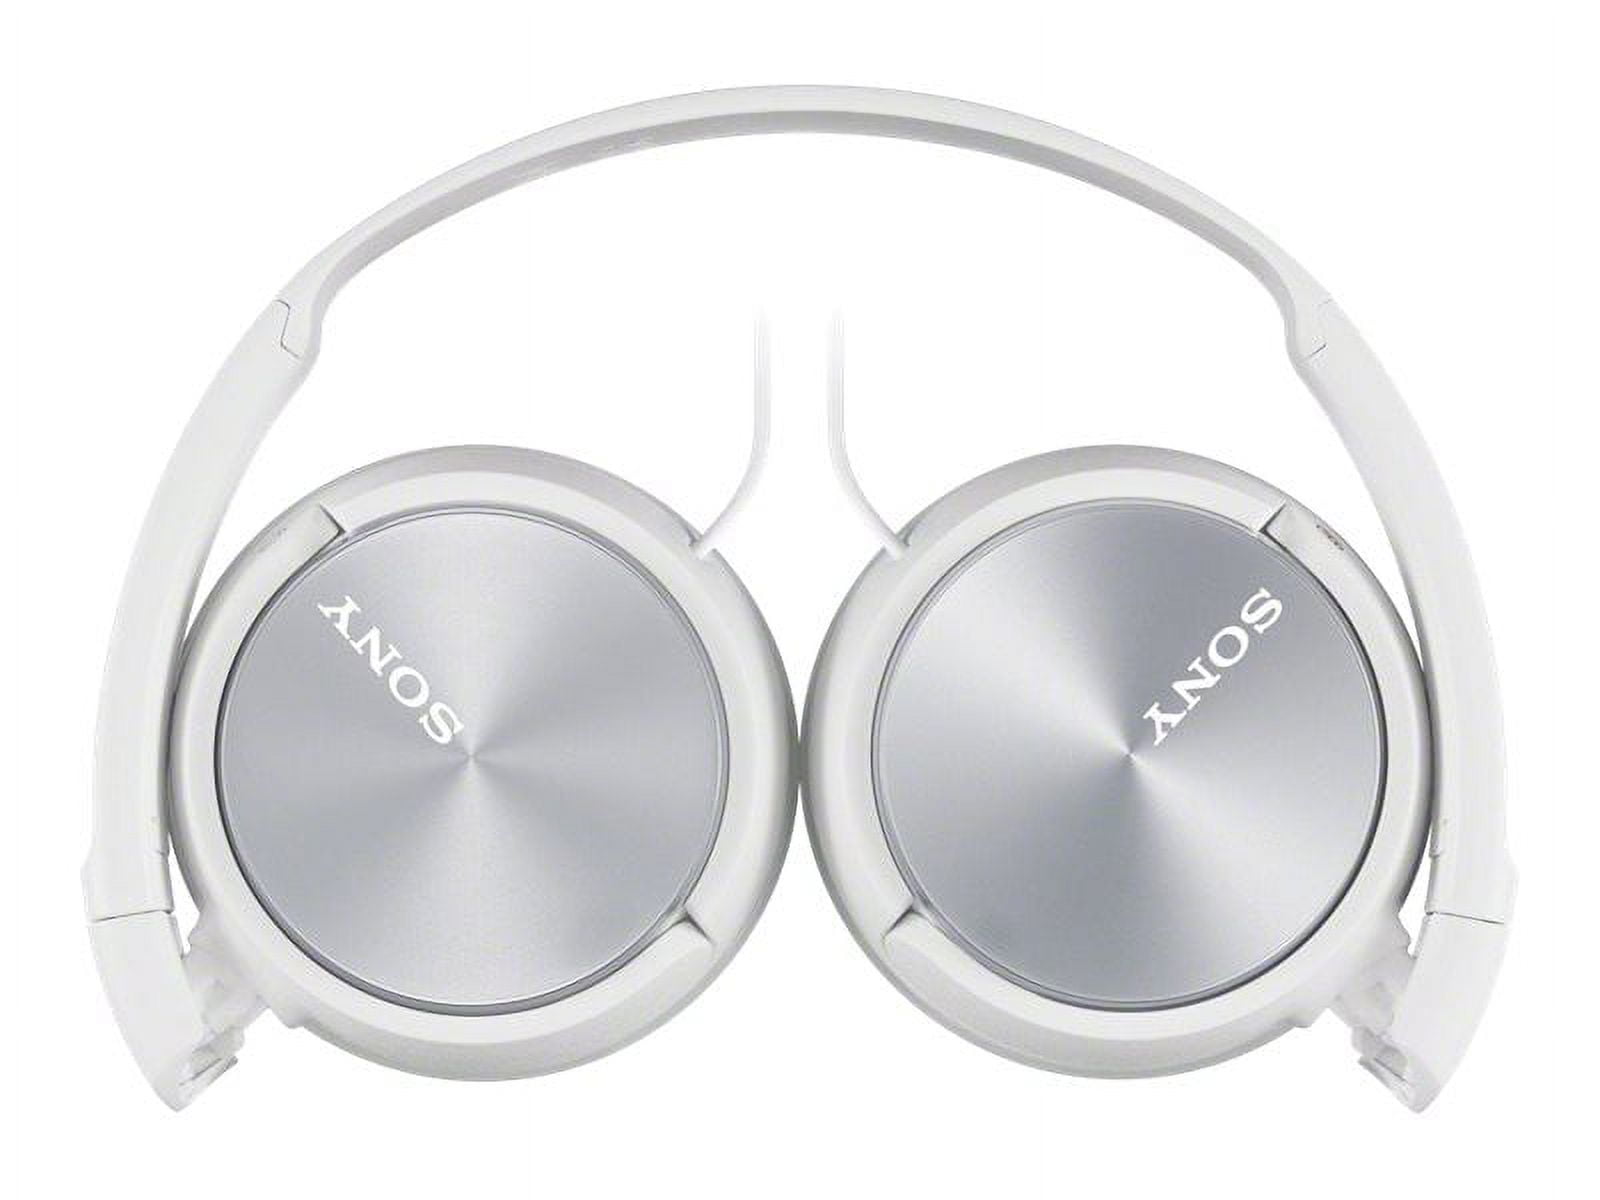 Sony MDR-ZX310AP - ZX Series size with mic - full - 3.5 mm white headphones - jack wired - 